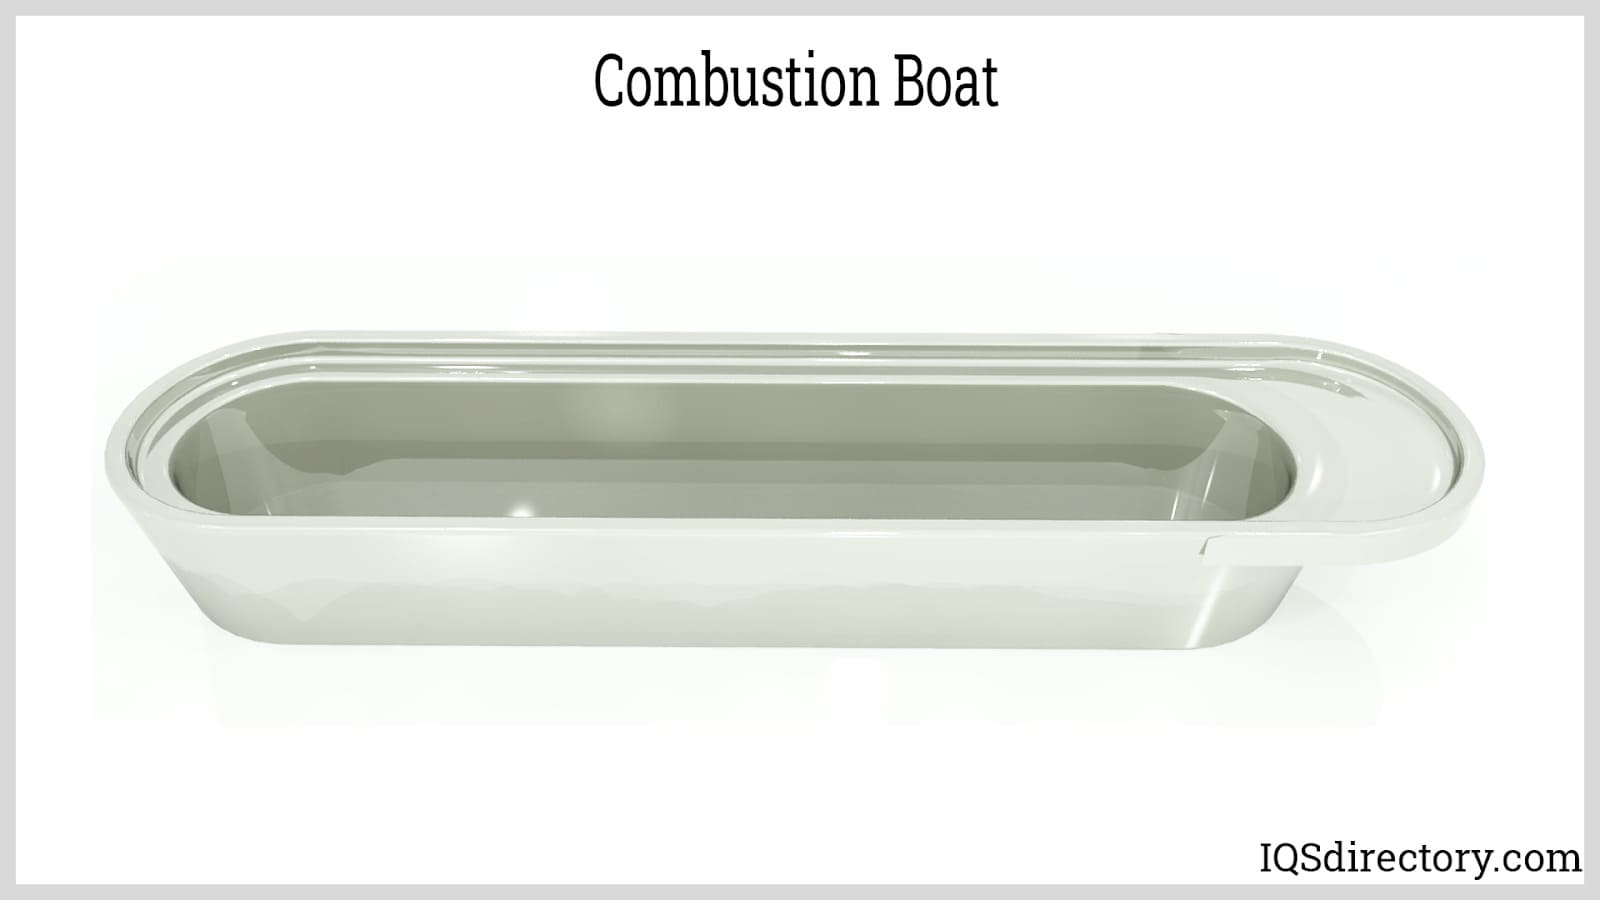 Combustion Boat